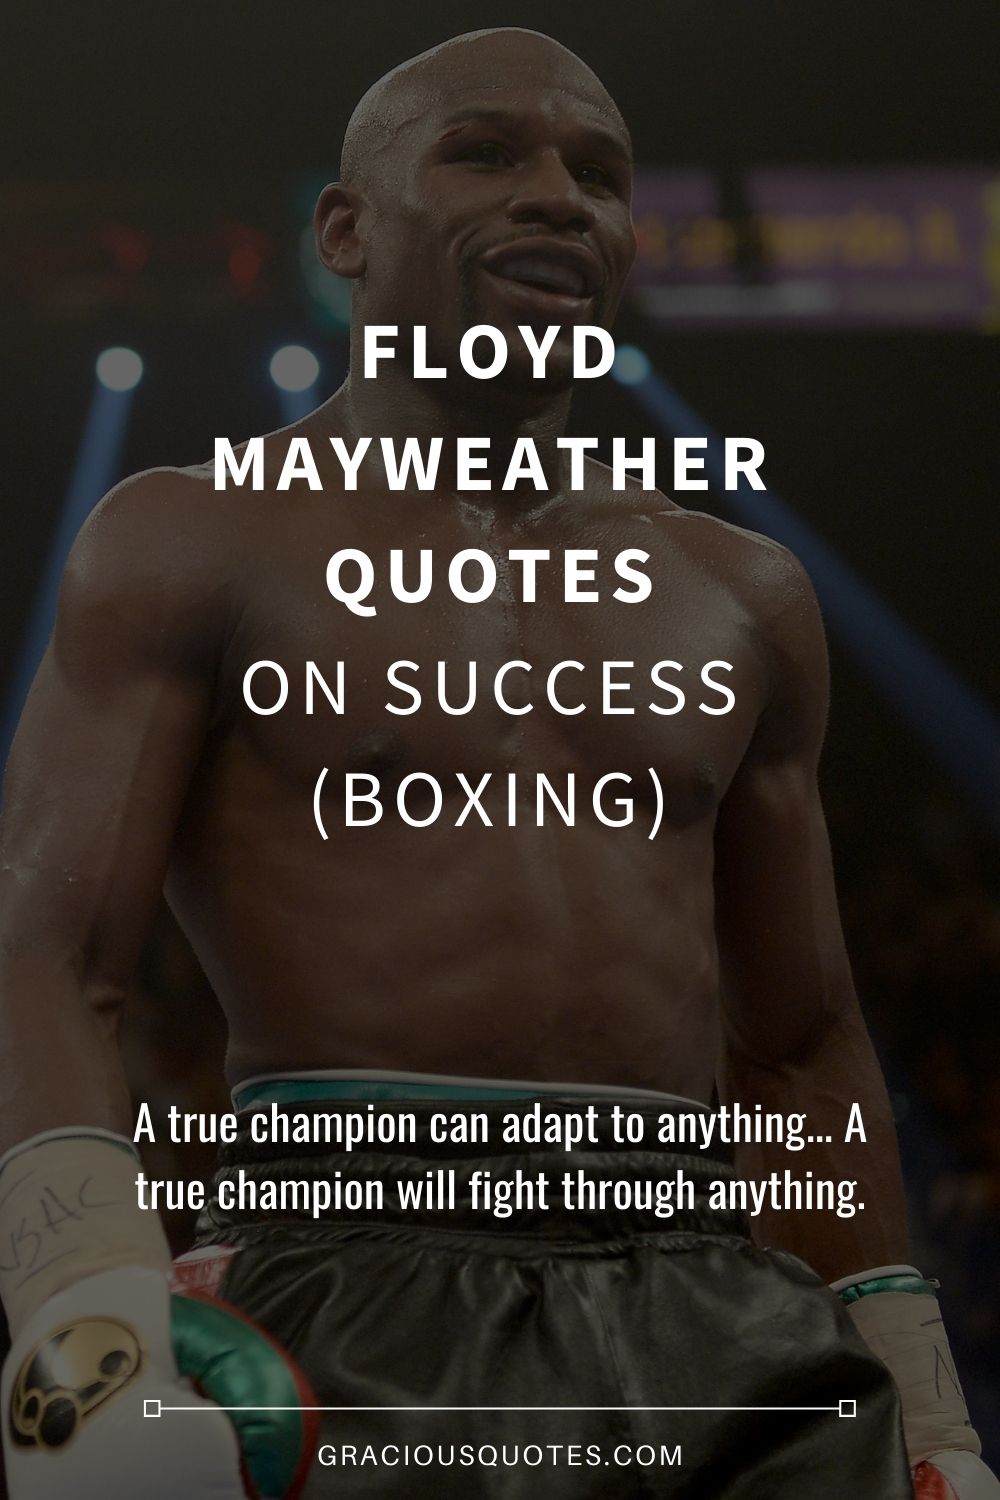 Floyd Mayweather Quotes on Success (BOXING) - Gracious Quotes